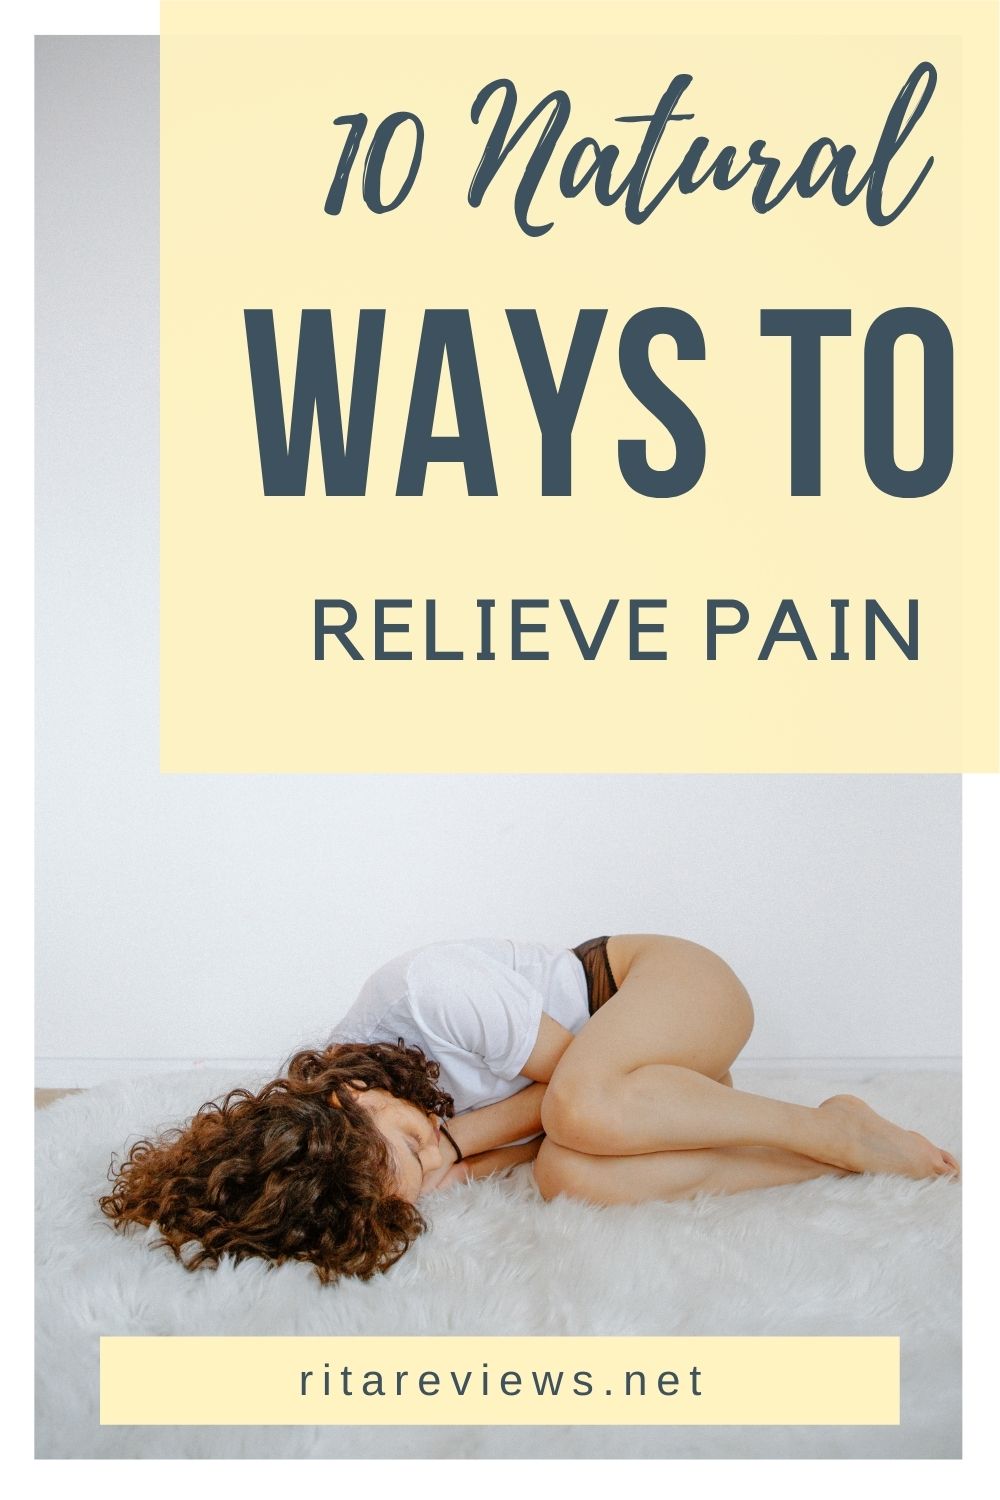 10 Natural Ways To Relieve Pain